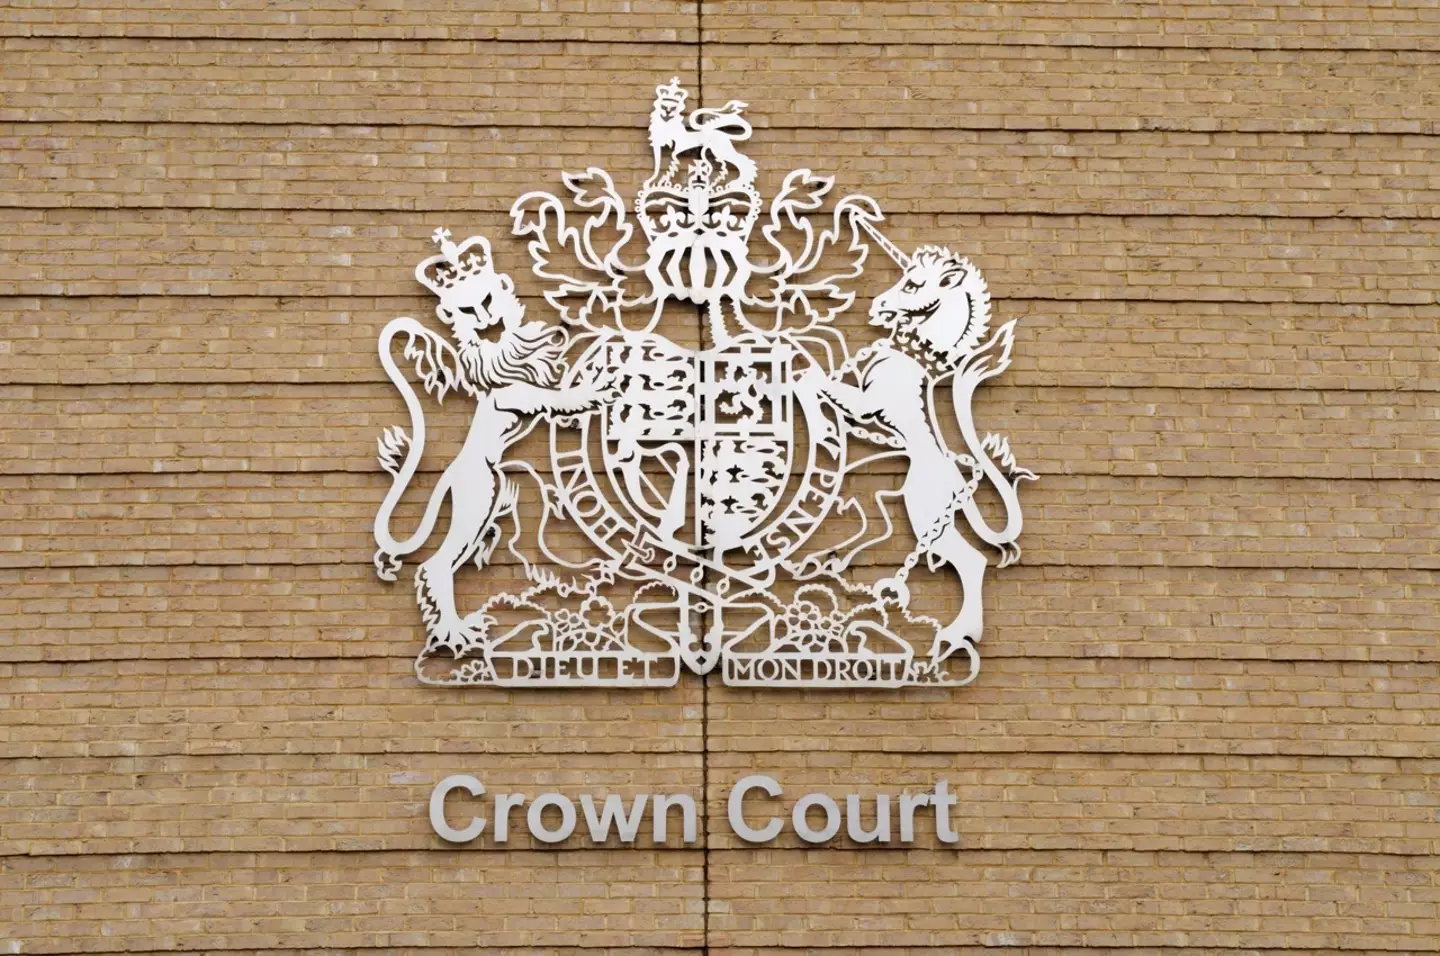 The 40-year-old, of Bishop's Castle, is now on trial at at Cambridge Crown Court and denies two counts of assault by penetration.